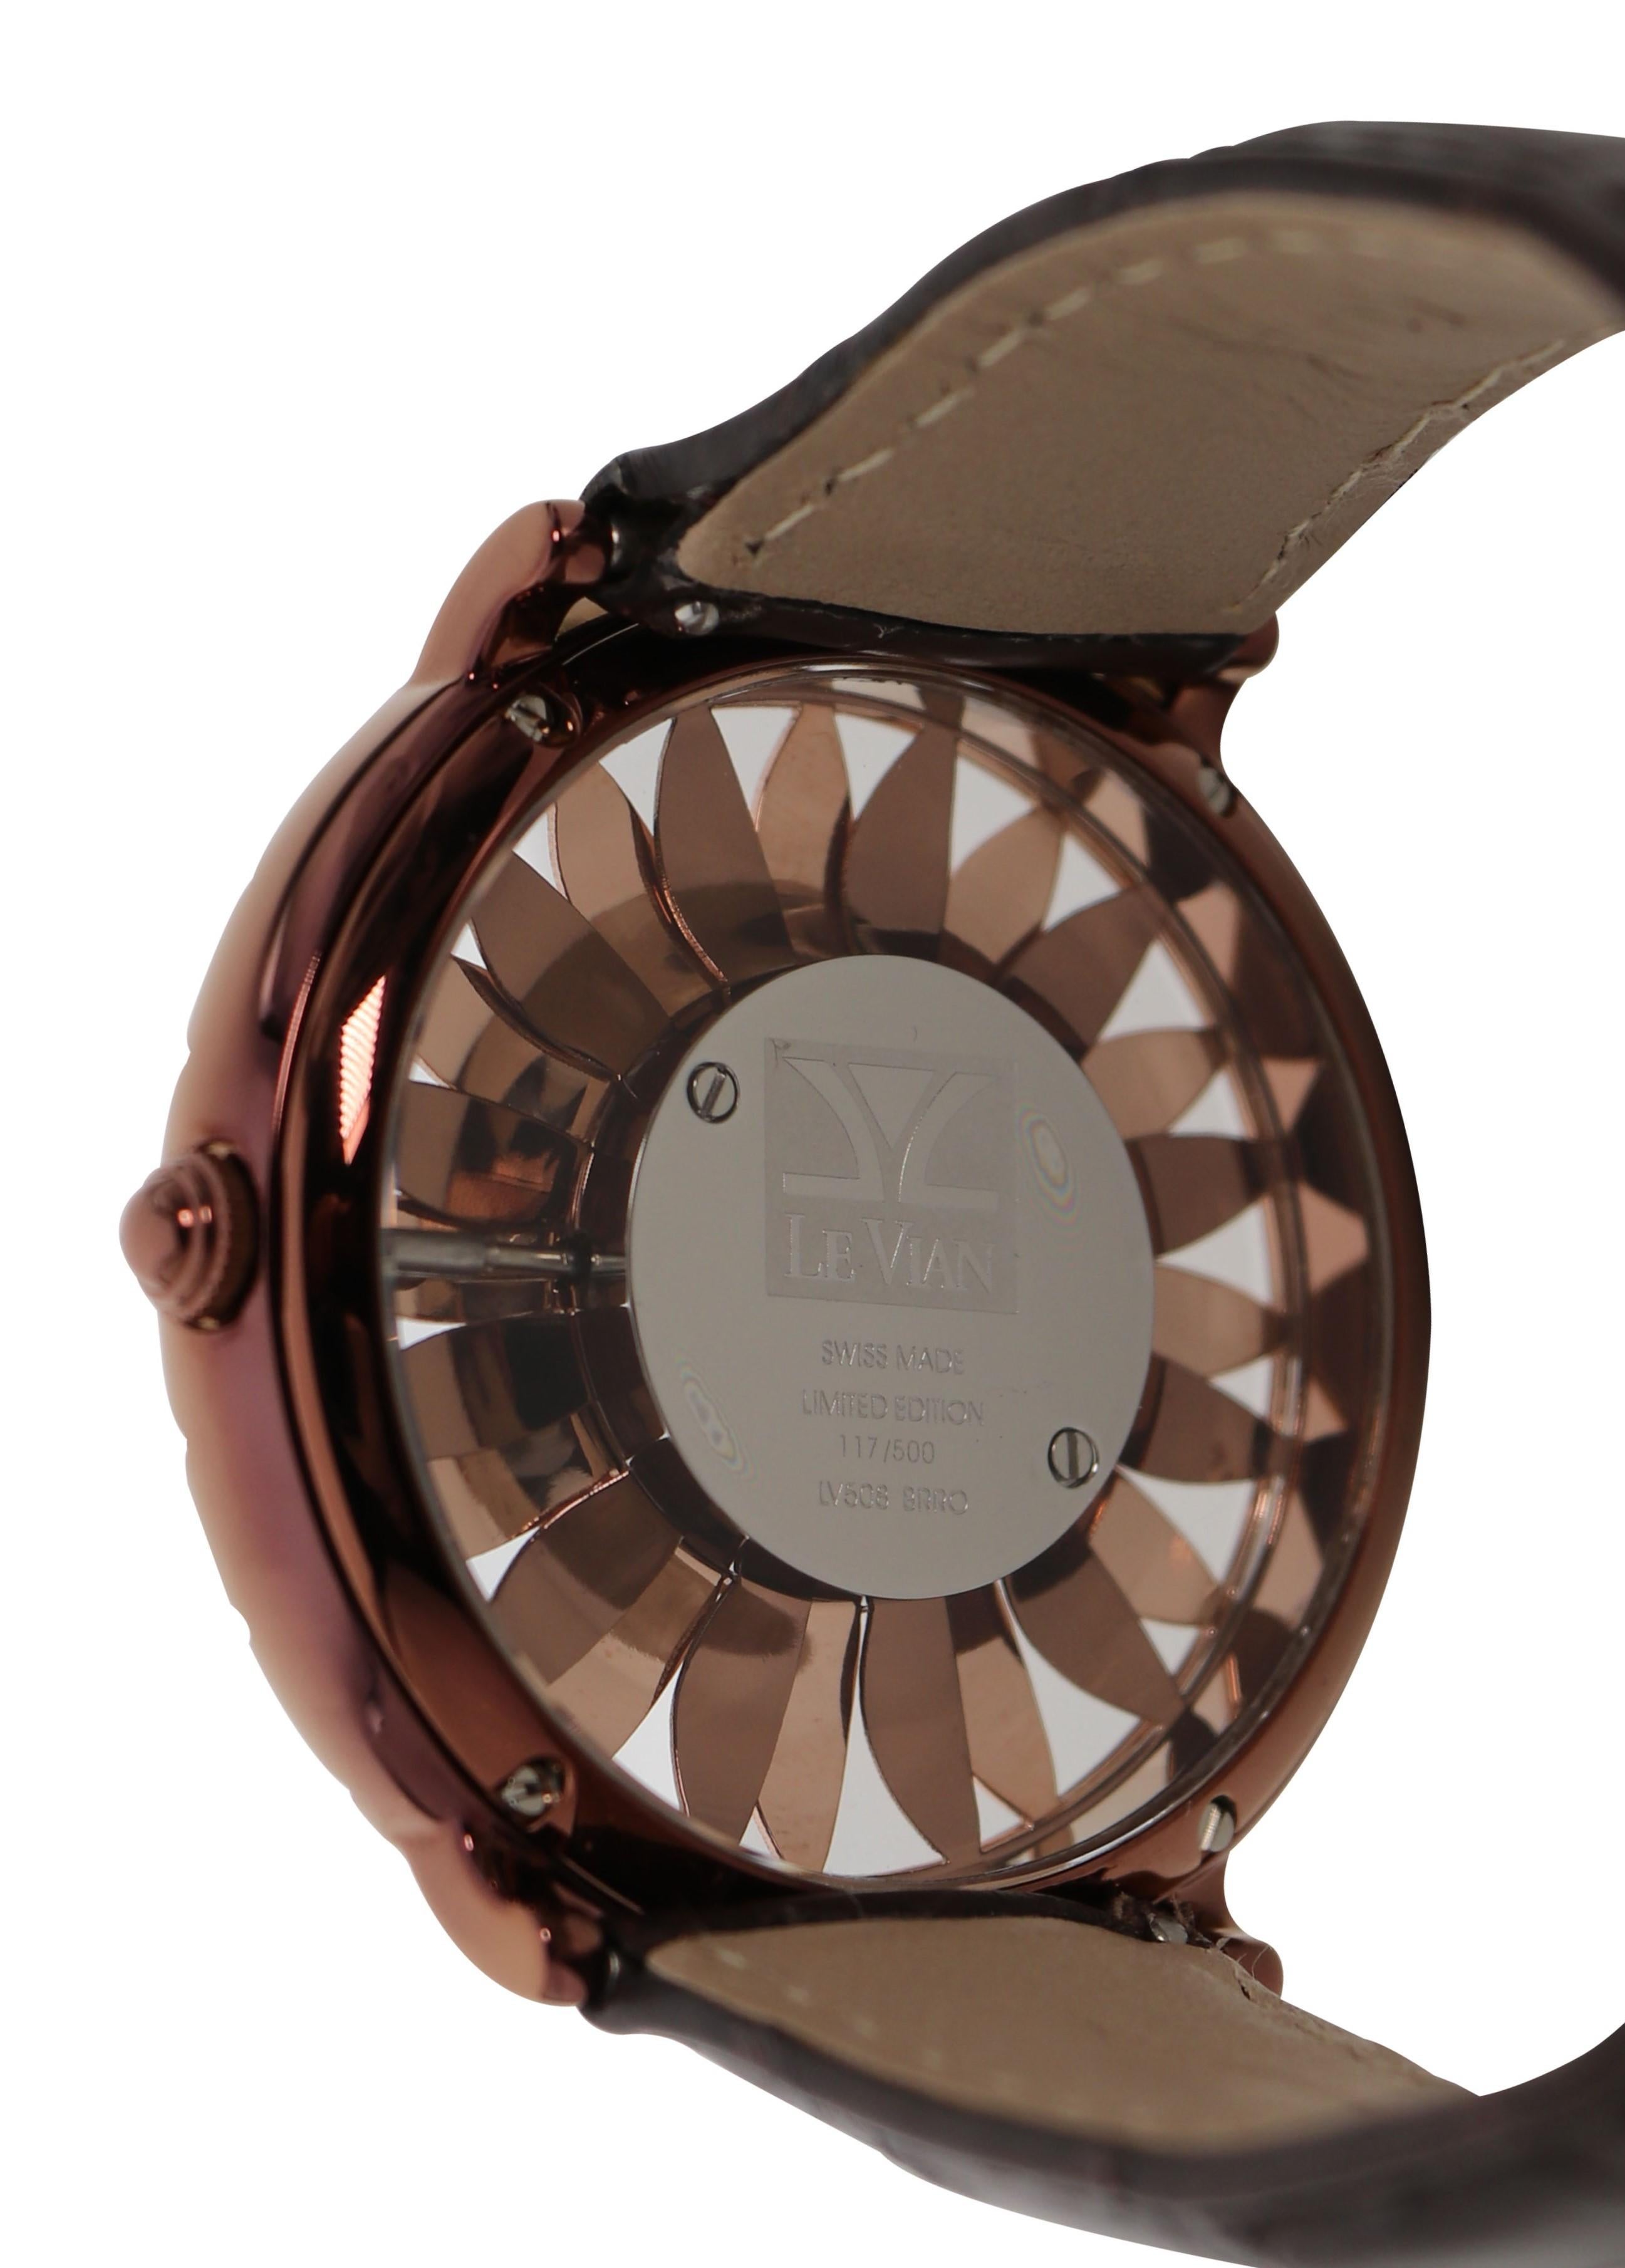 levian watches